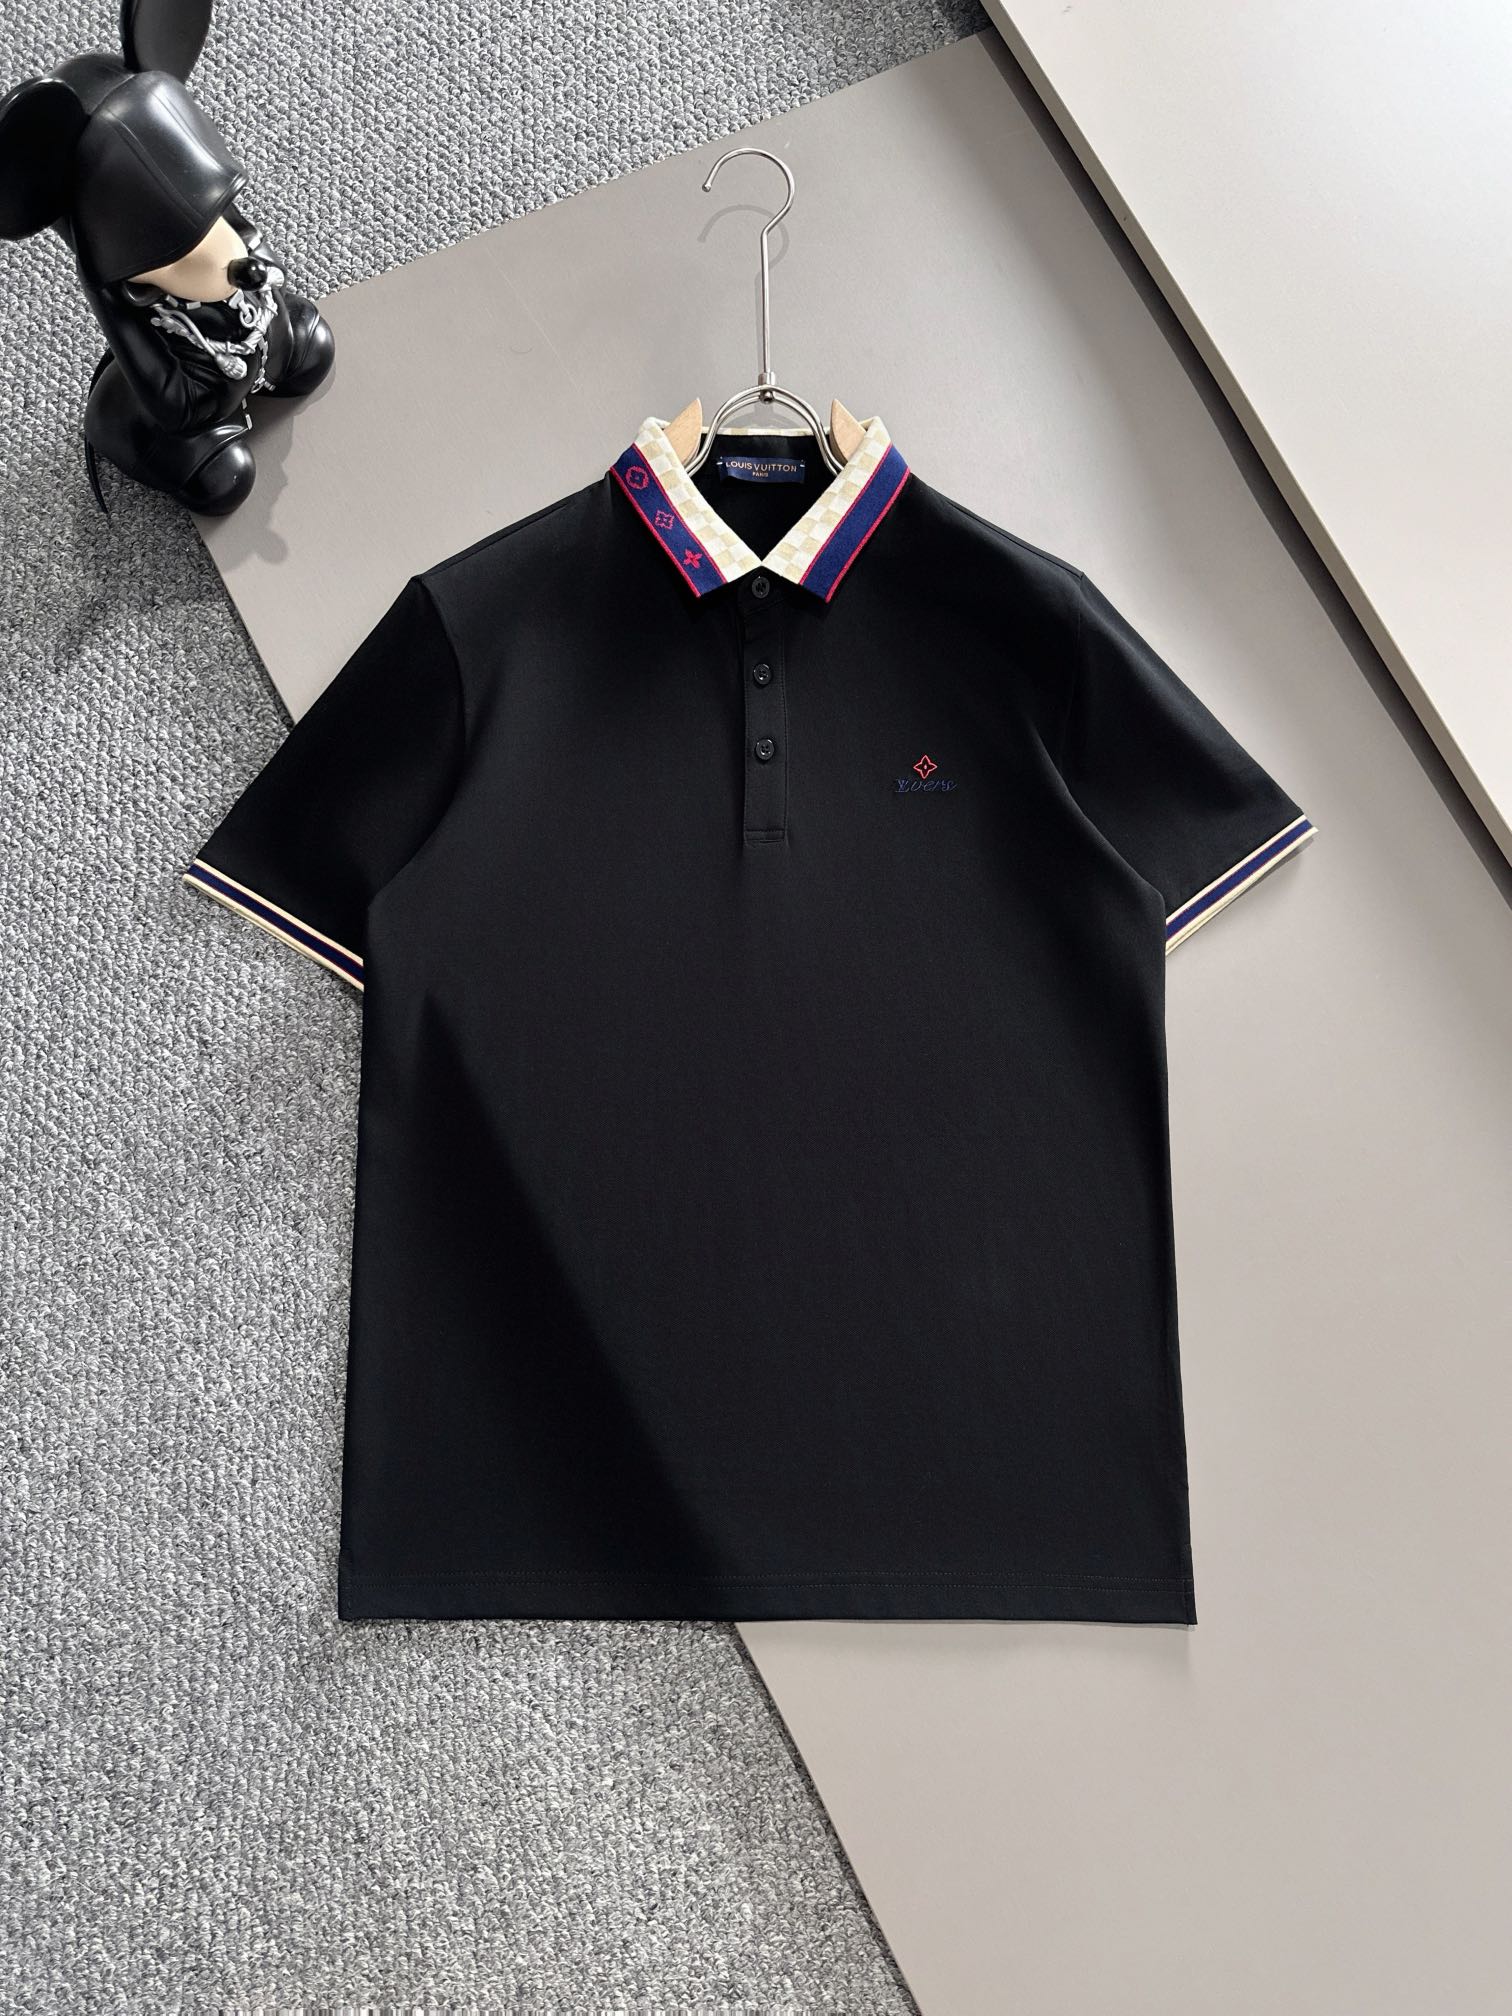 Louis Vuitton Clothing Polo T-Shirt Black White Embroidery Spring/Summer Collection Fashion